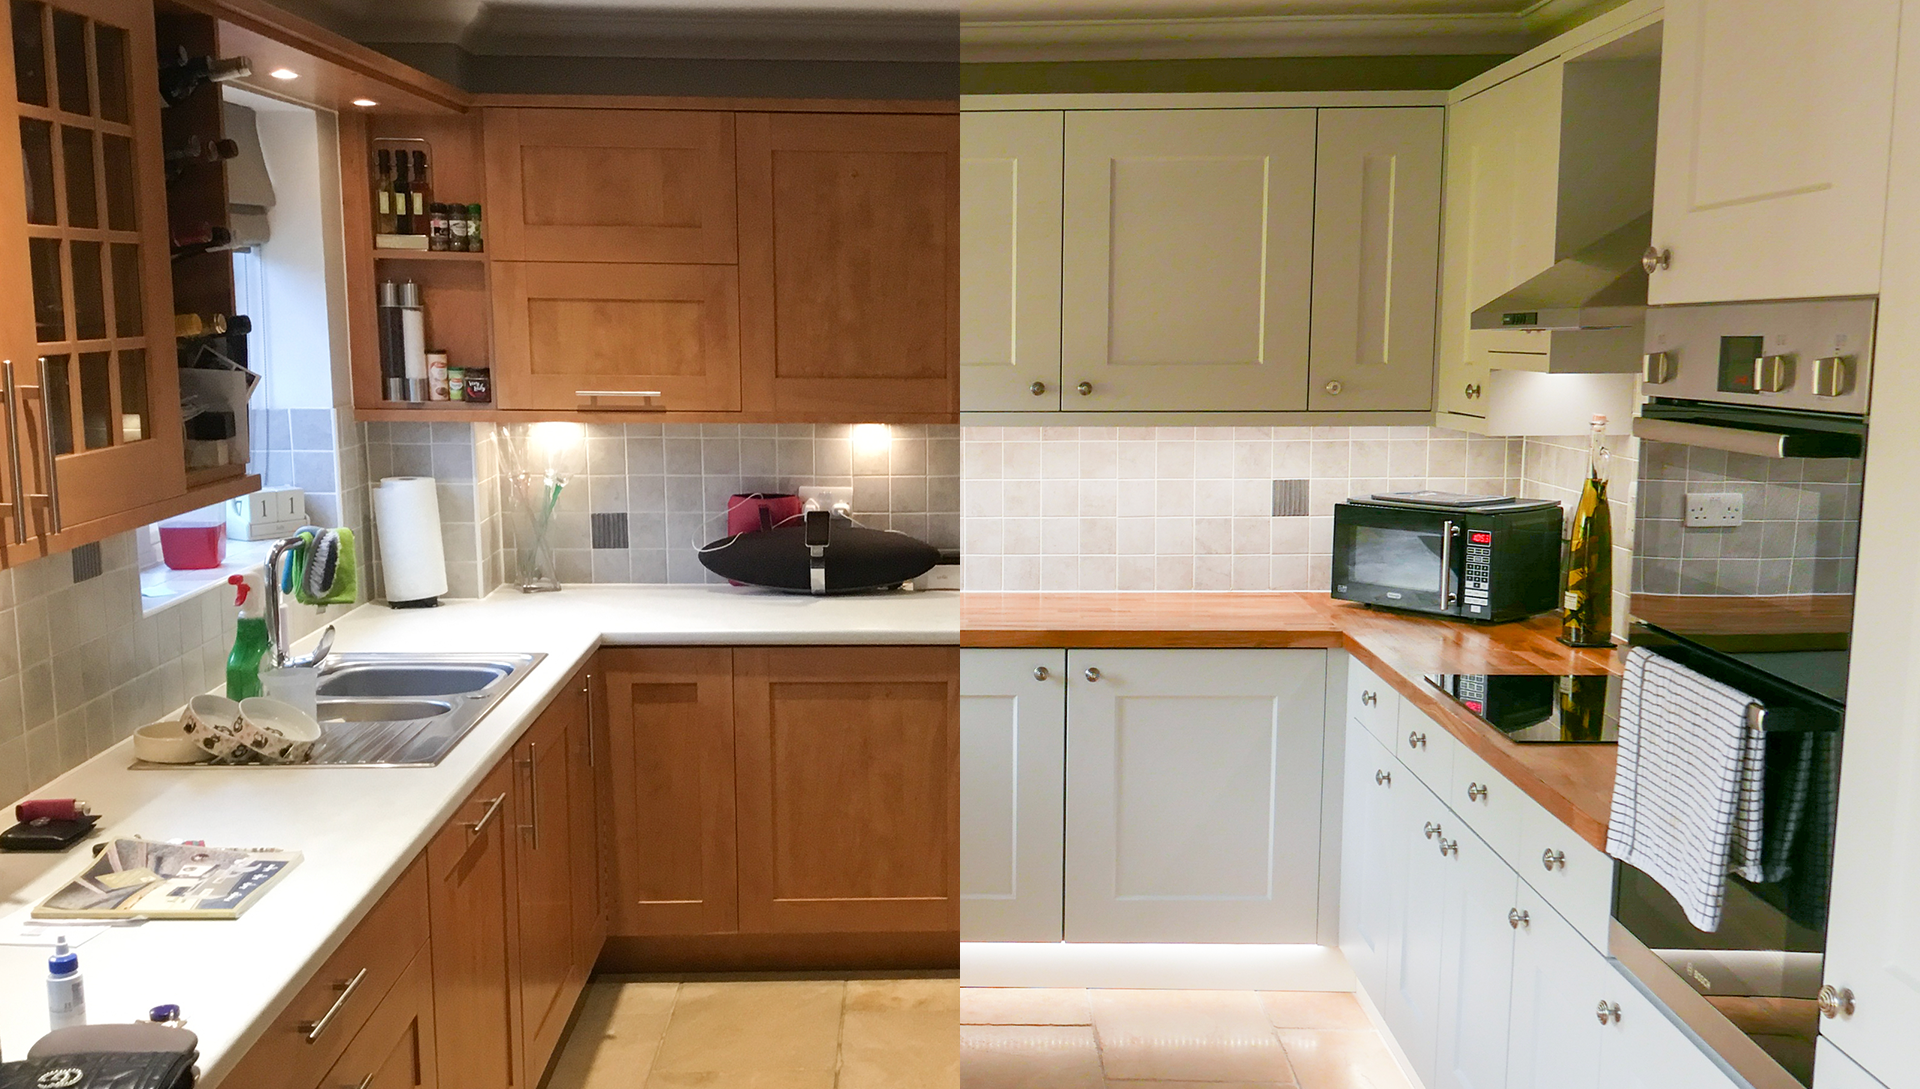 Kitchens Bathrooms and Bedrooms Wirral Liverpool Cheshire - Bespoke Kitchens Bathrooms Bedrooms Interior Fitting Joinery Wirral Liverpool Cheshire